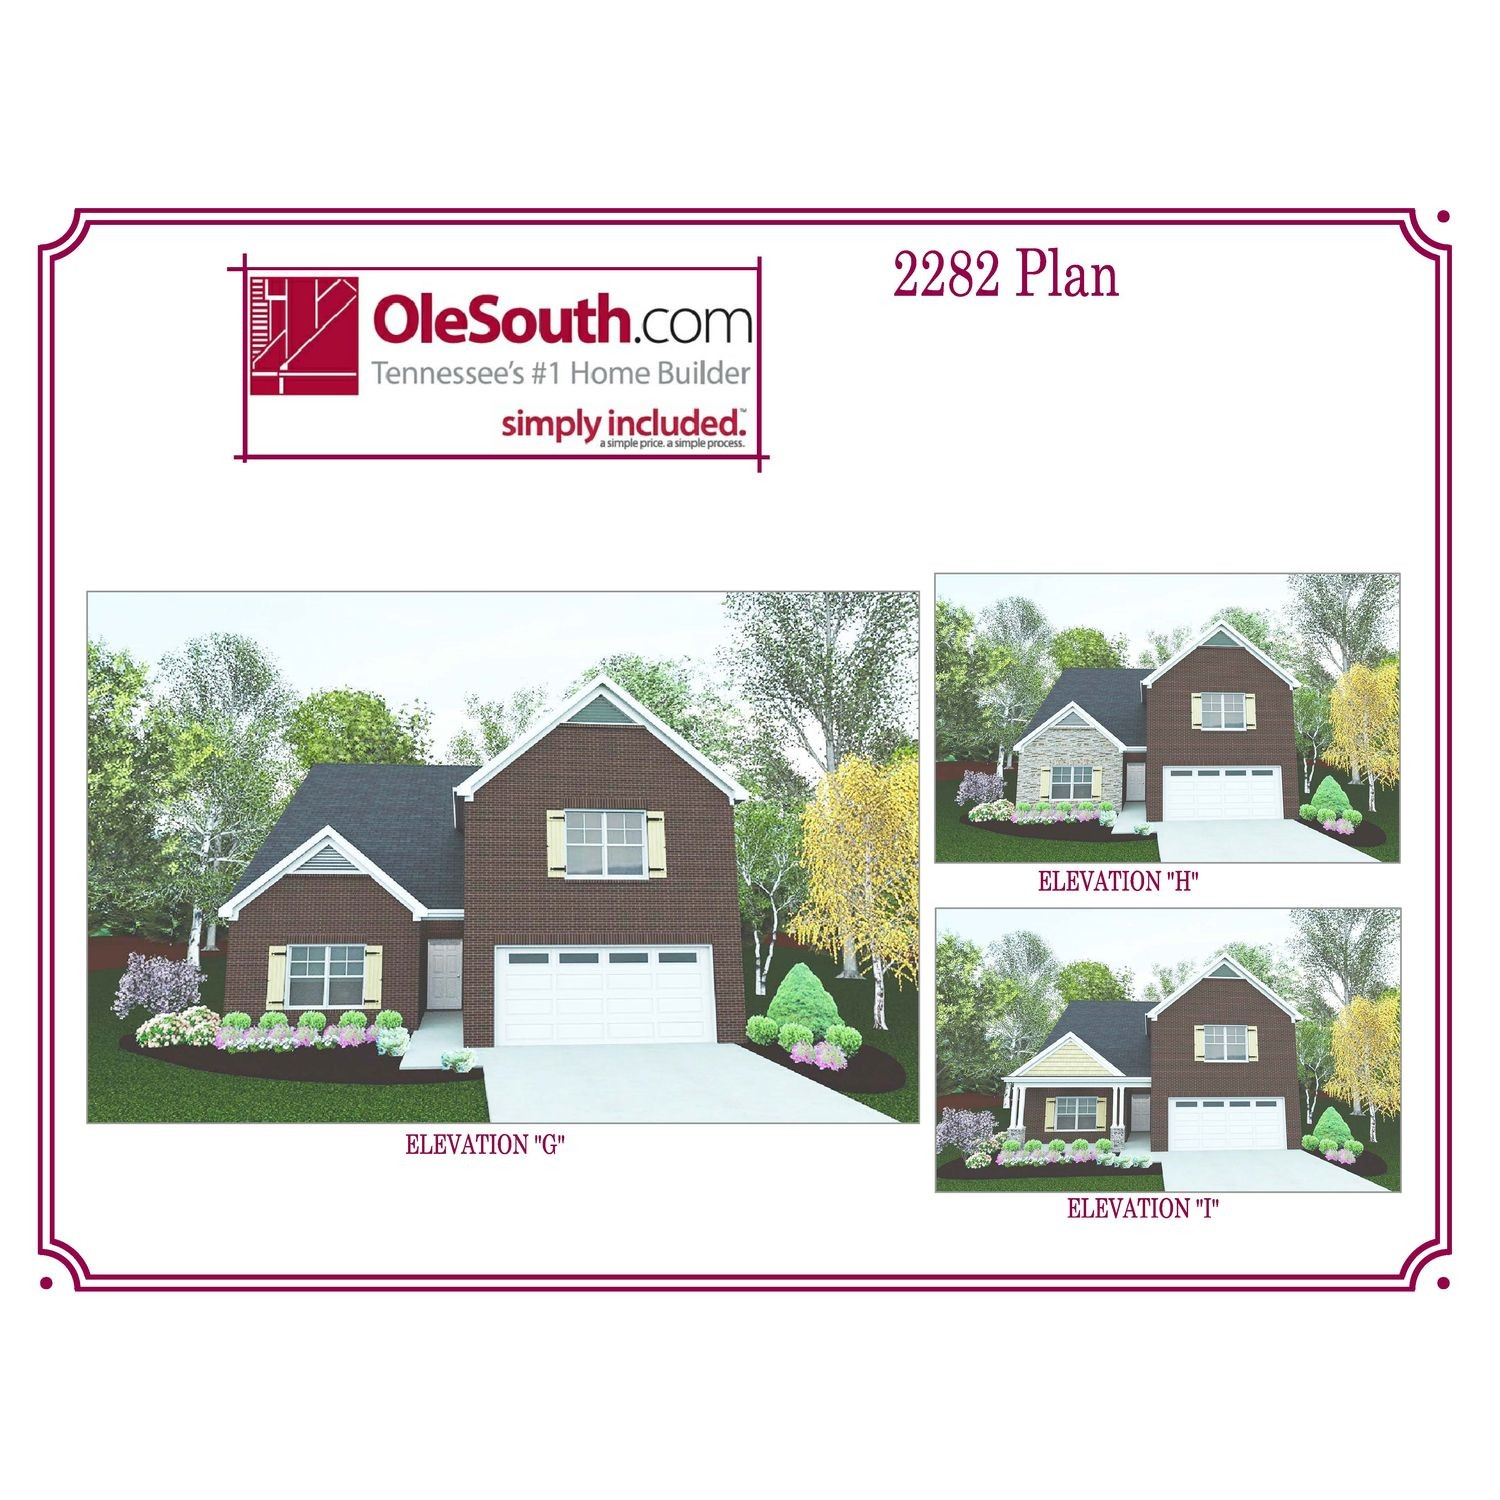 1. 317 Moccasin Trail - Lot 189